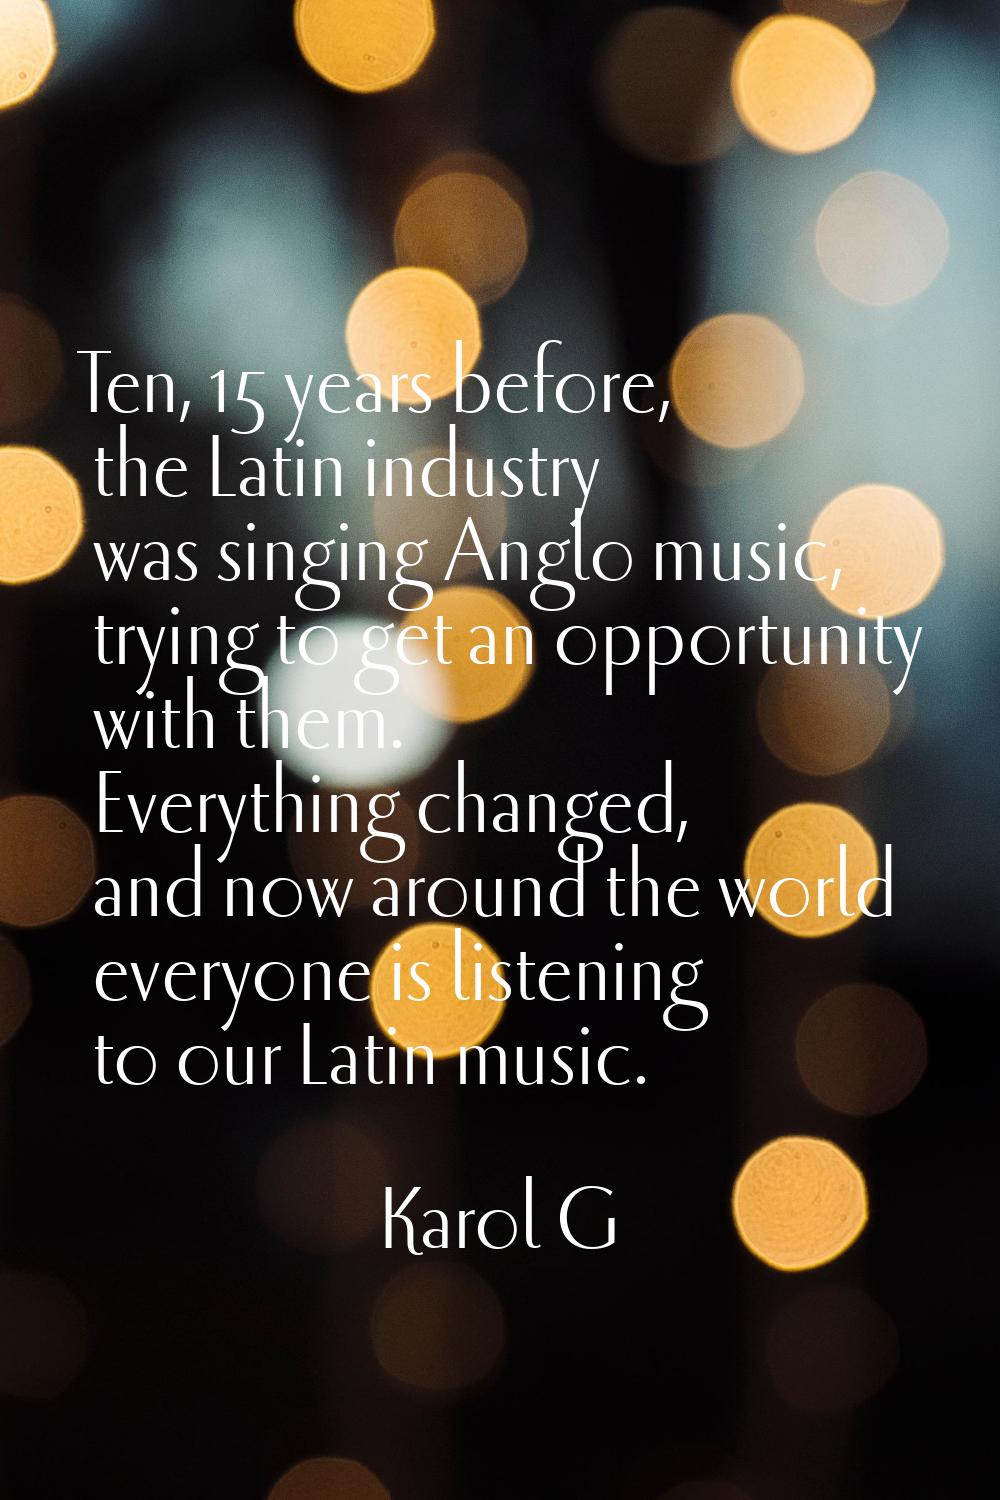 Ten, 15 years before, the Latin industry was singing Anglo music, trying to get an opportunity with